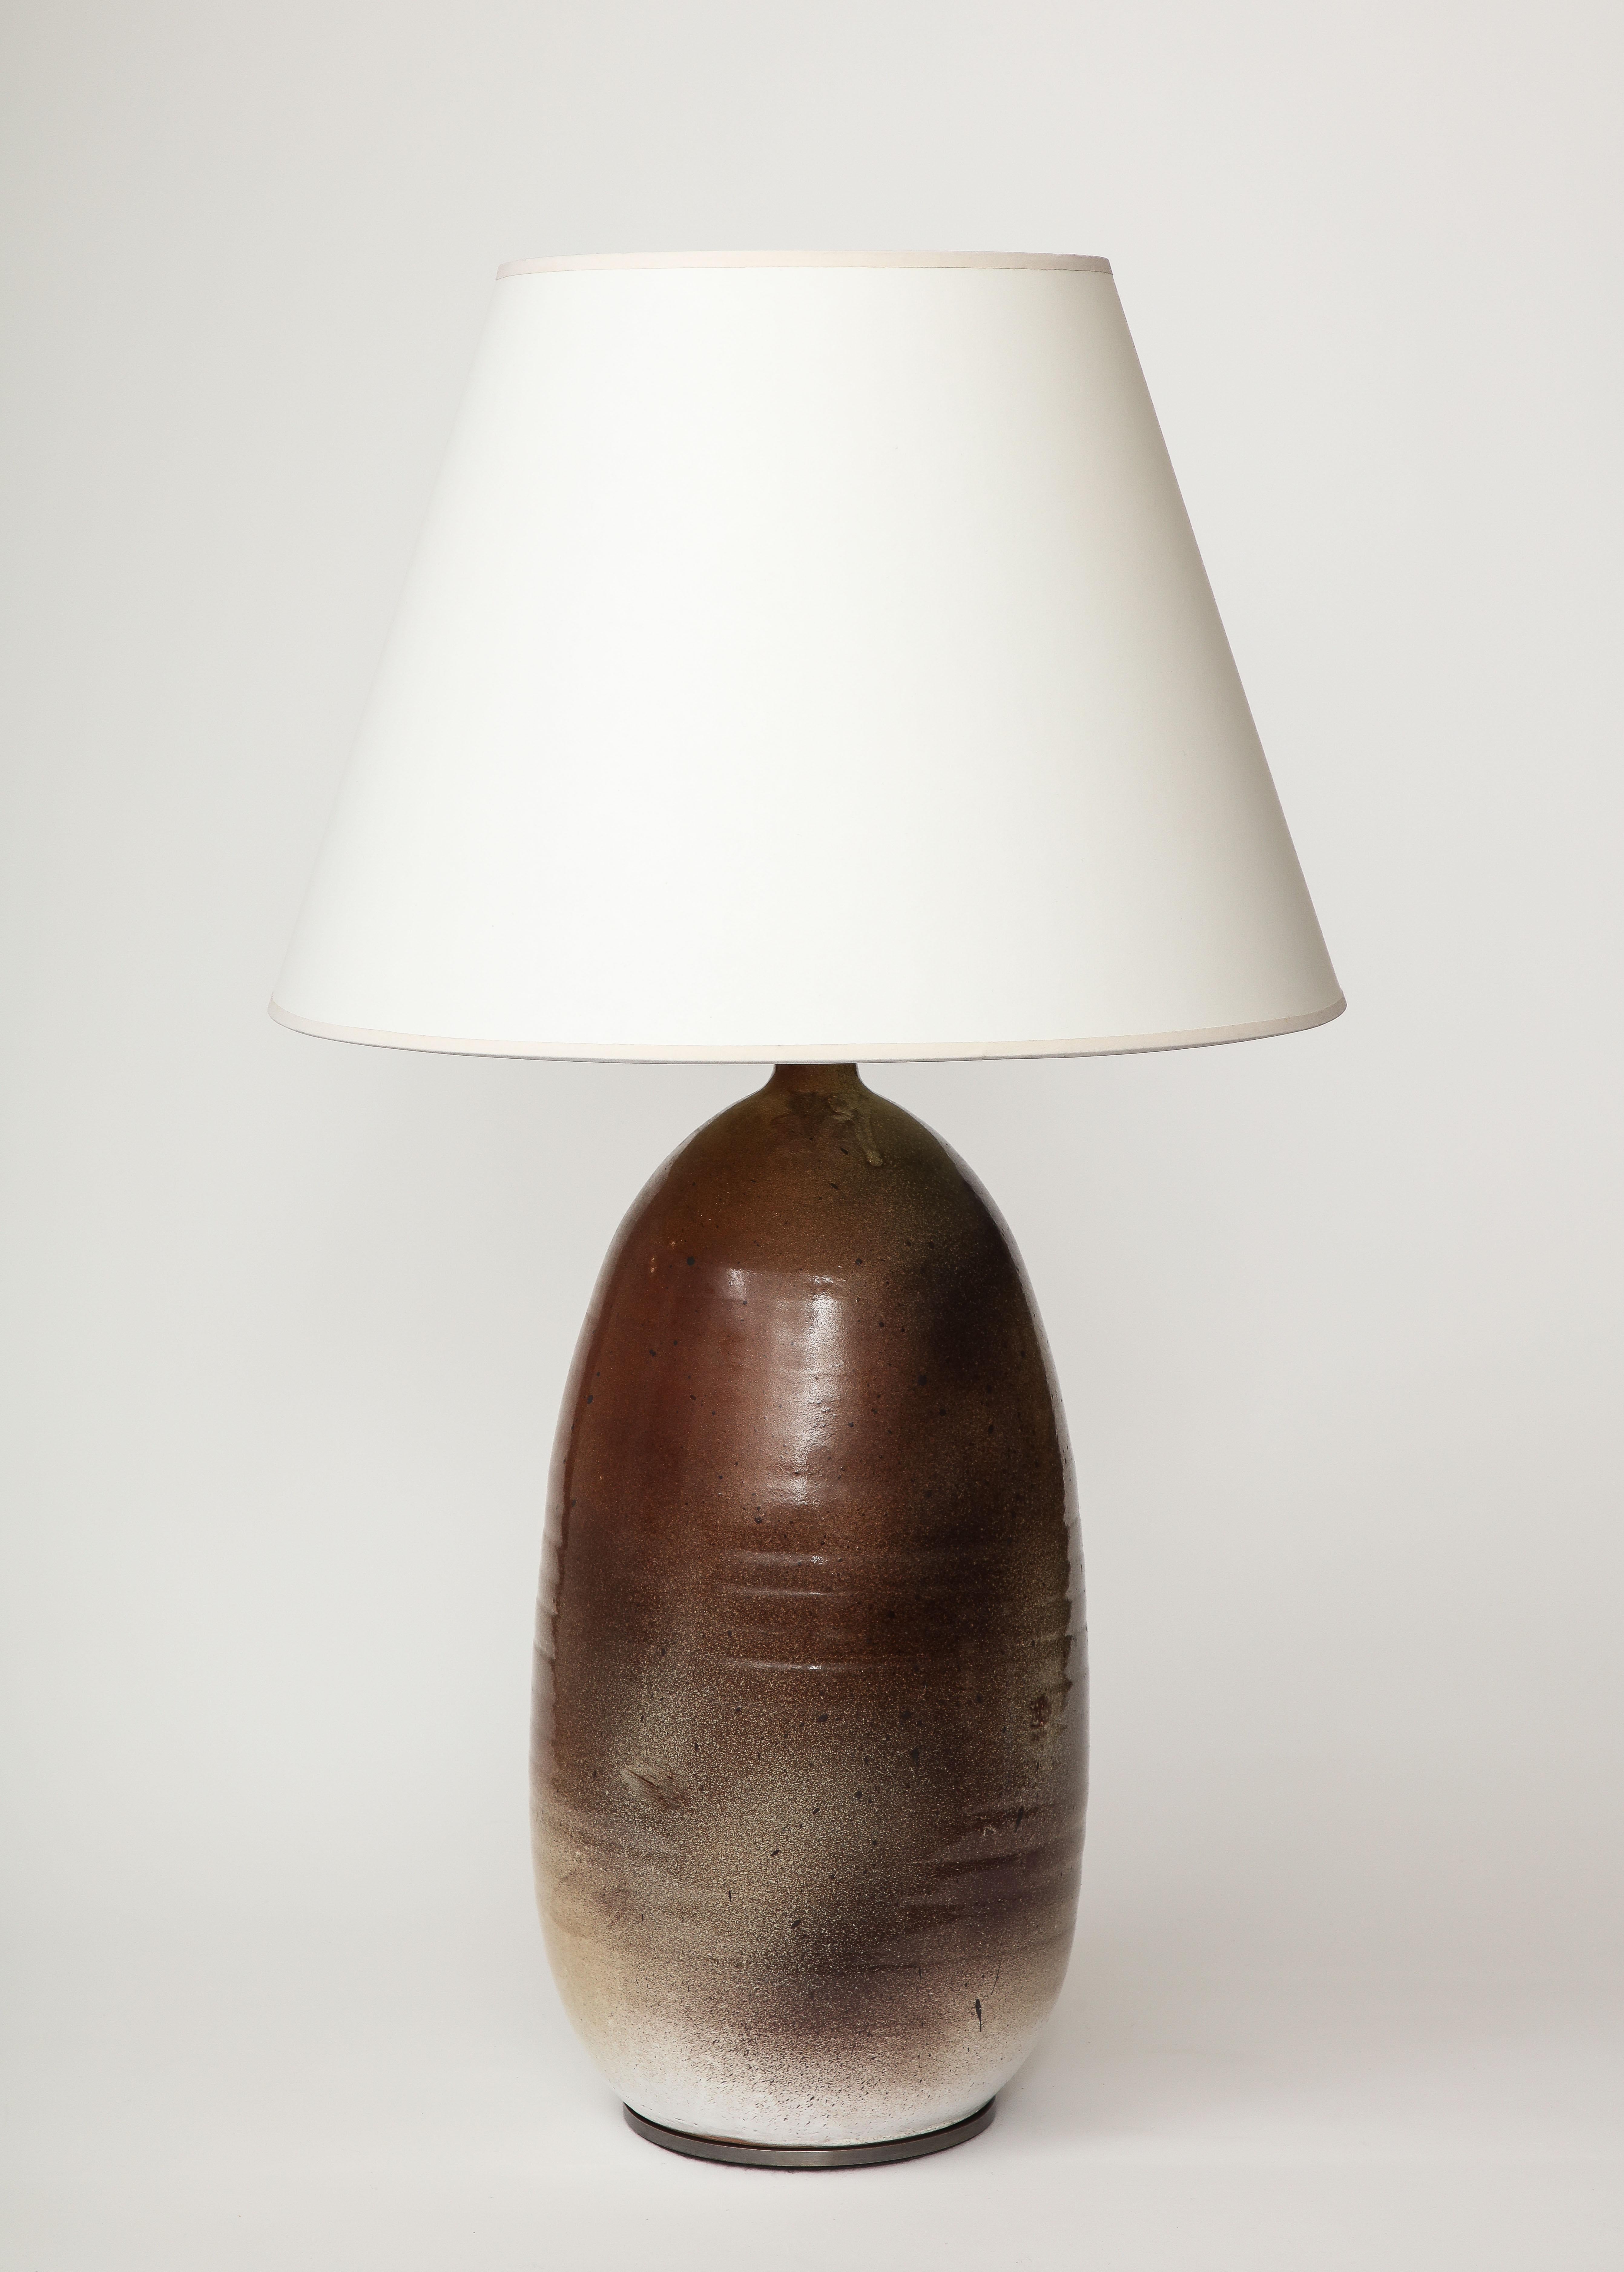 Tall, handsome table lamp with beautiful glazing. This table lamp was produced by the celebrated French ceramic studio Keramos. 

Keramos was founded by a group of ceramicists in 1948. The studio included artists such as Georges Jouve, Roger Capron,